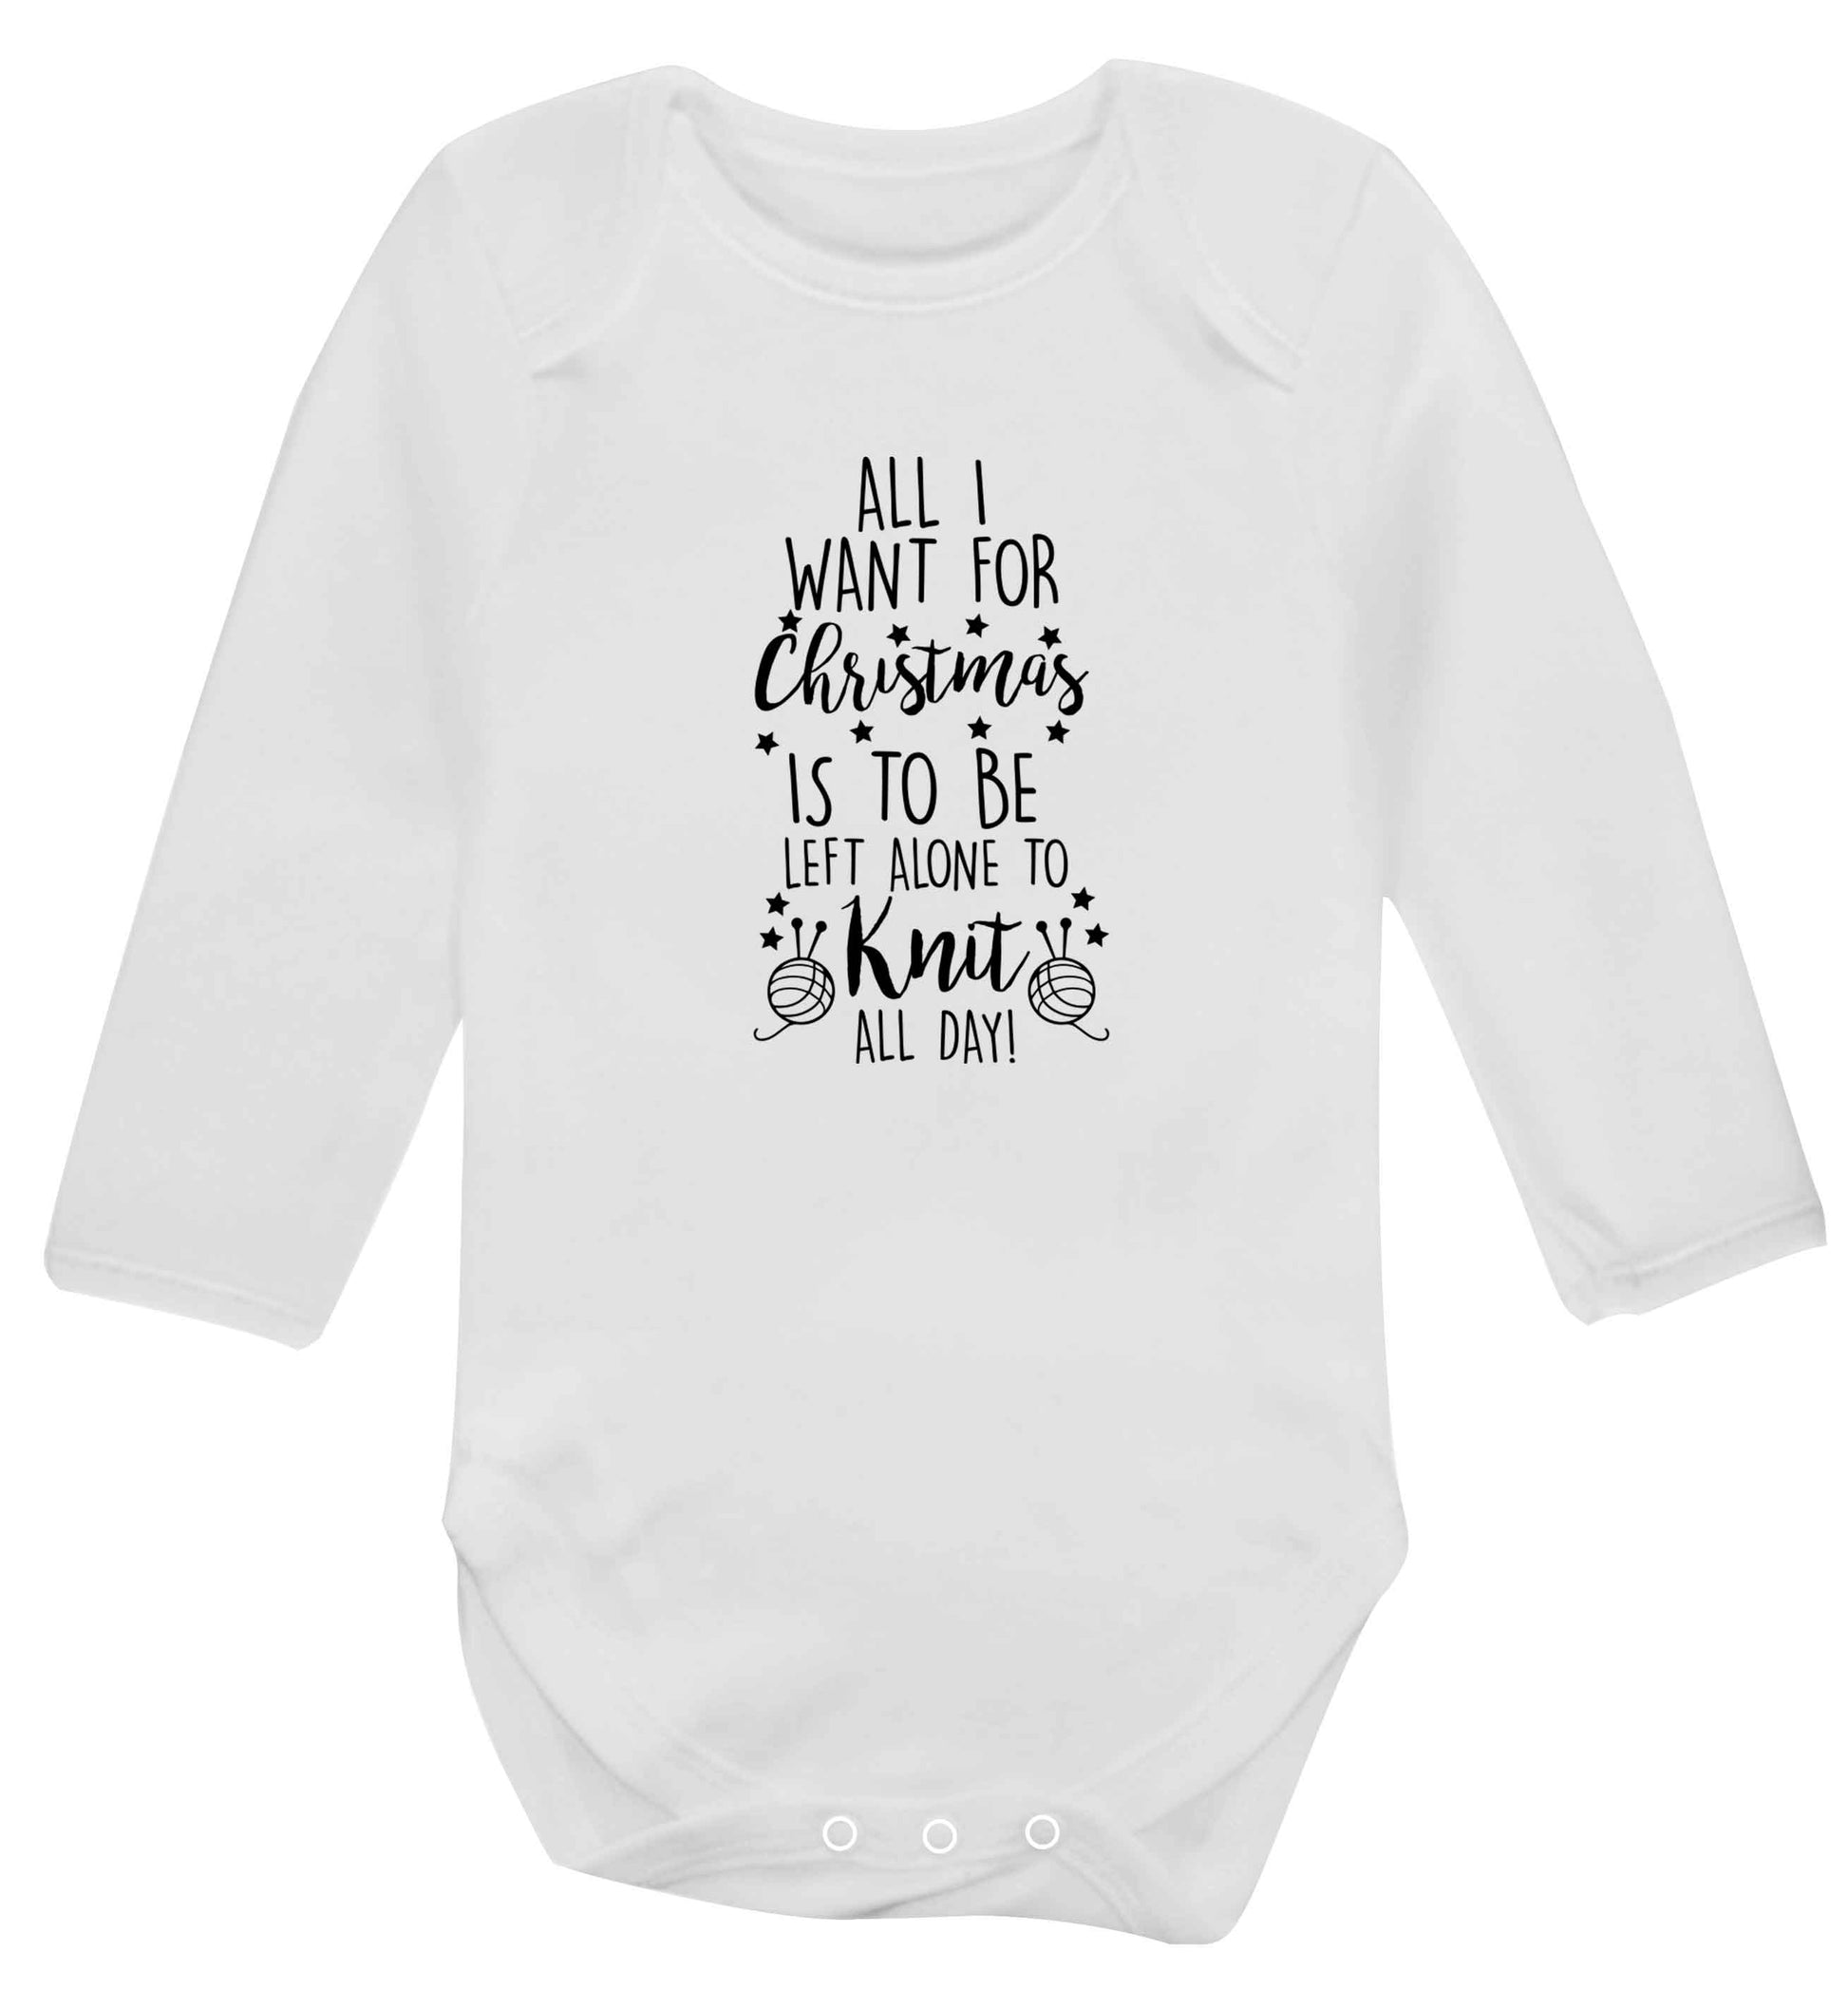 Merry Christmas baby vest long sleeved white 6-12 months